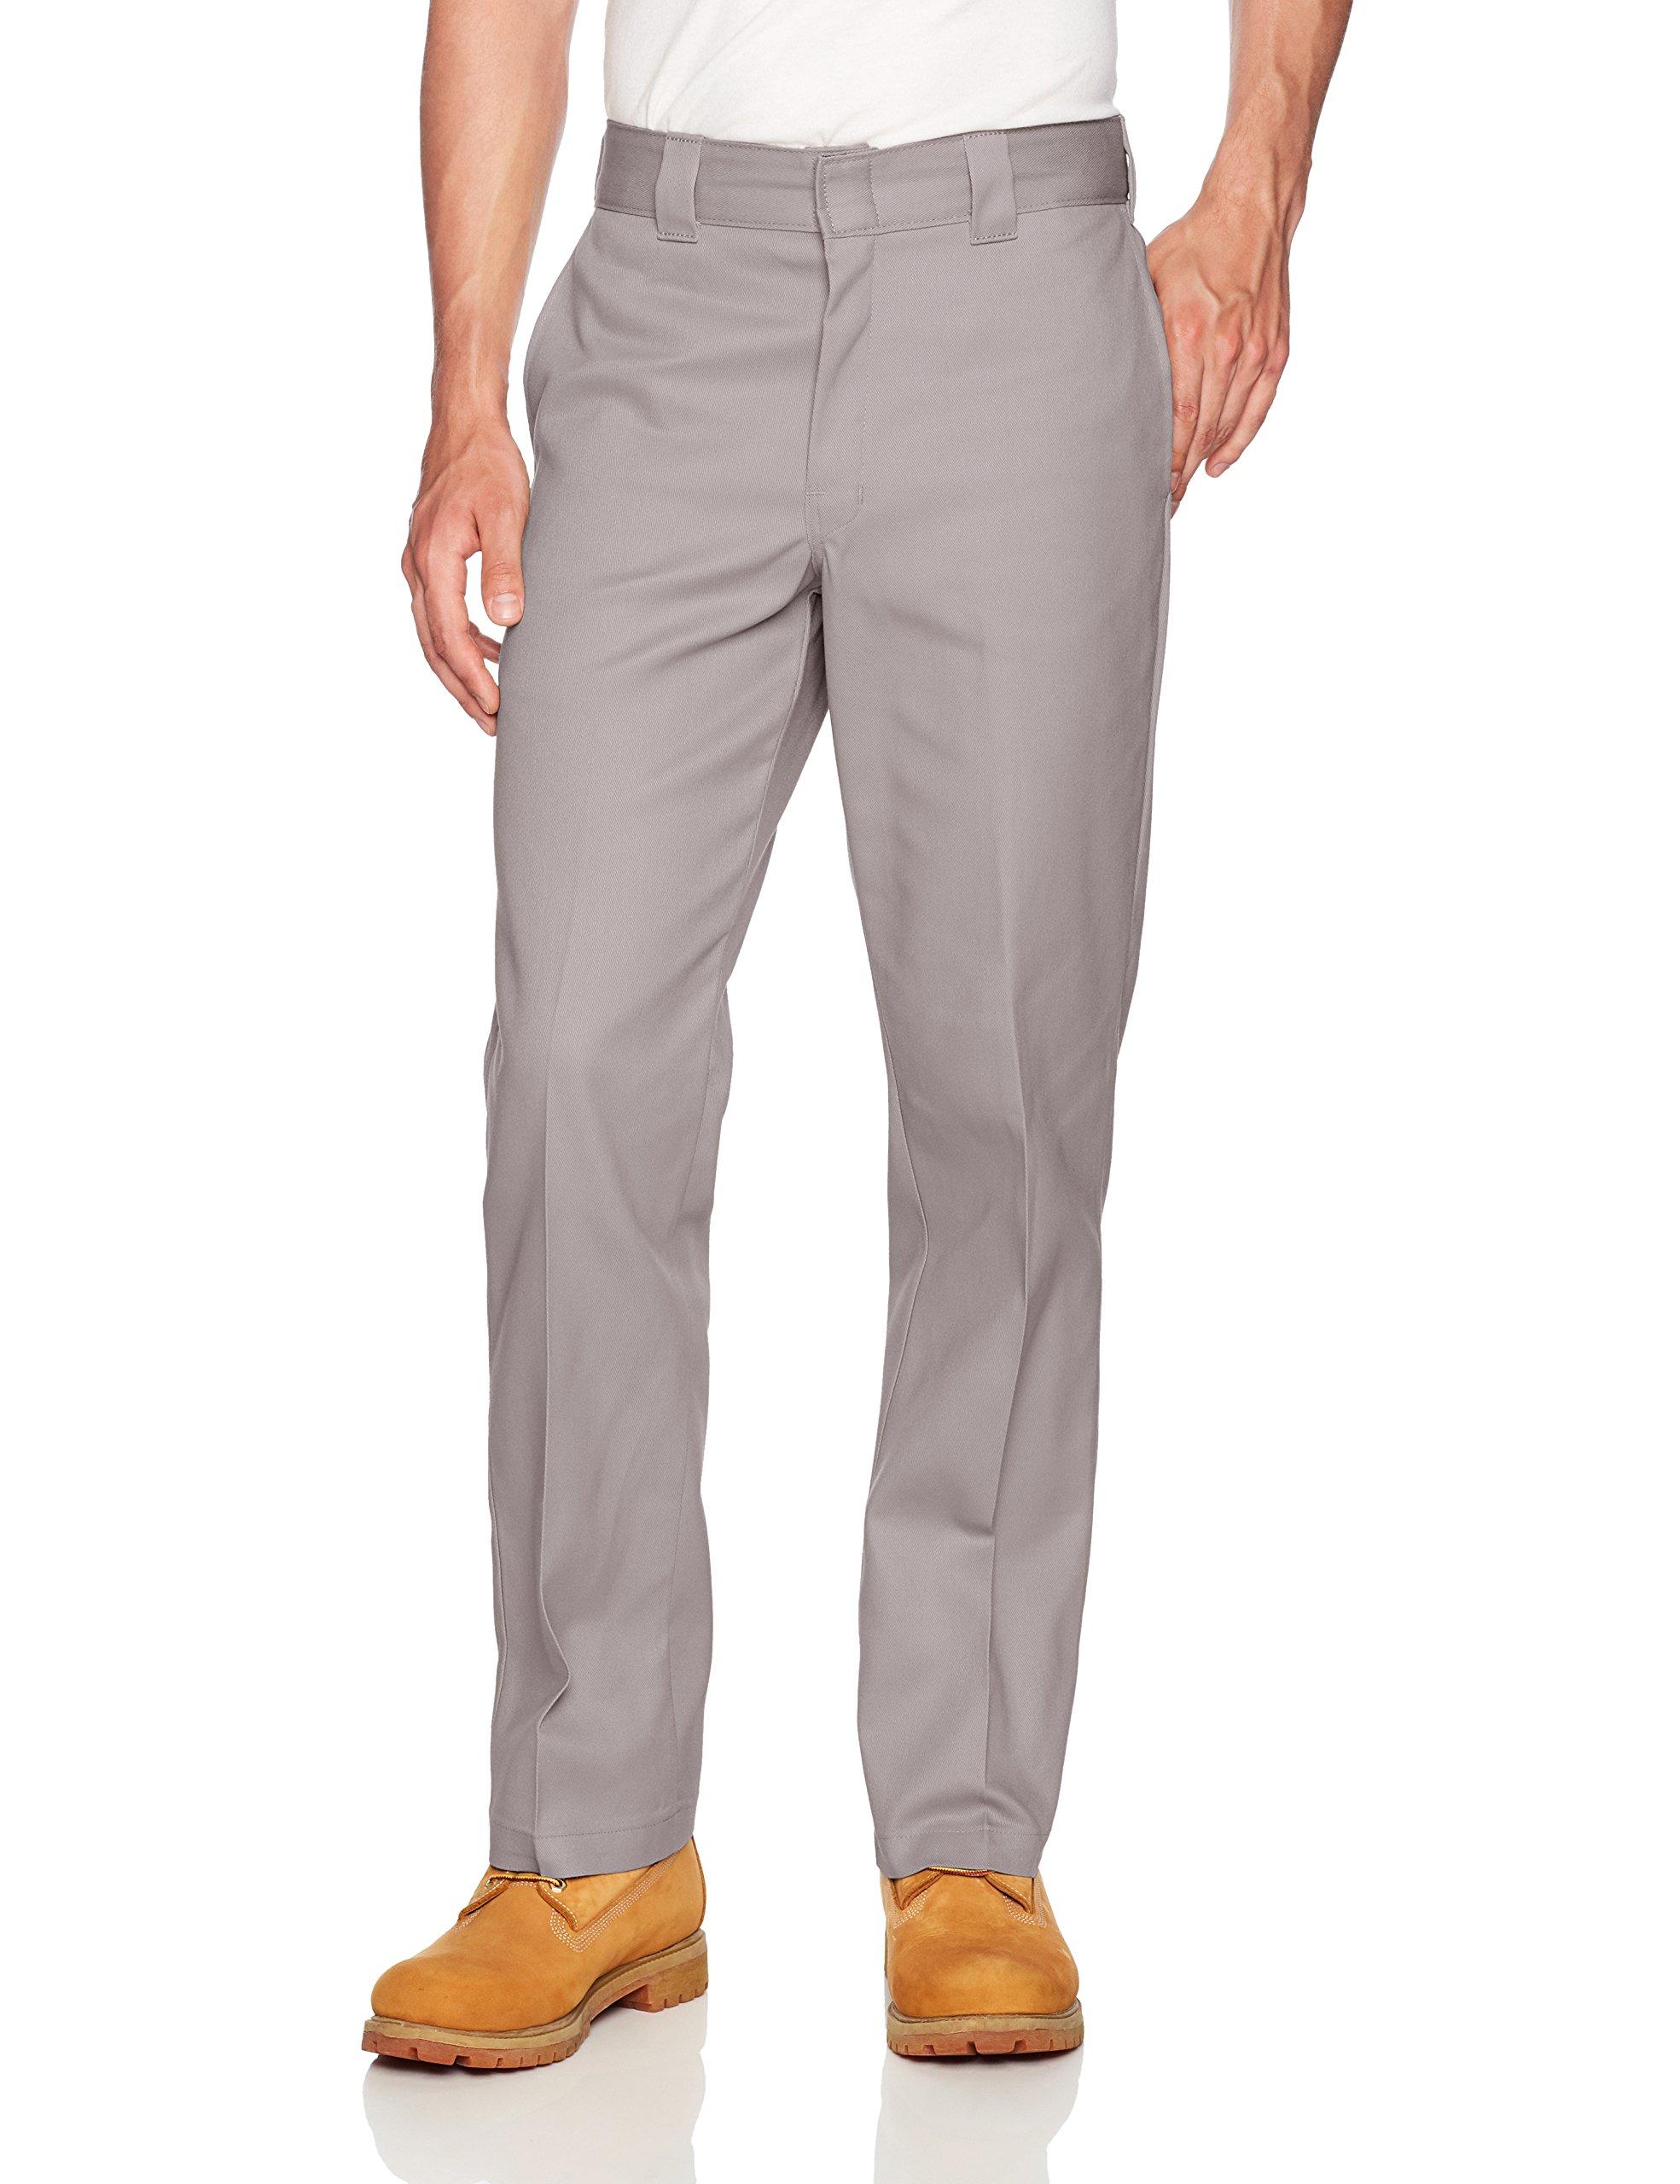 Dickies Cotton 874 Flex Work Pant in Silver/Gray (Gray) for Men - Lyst